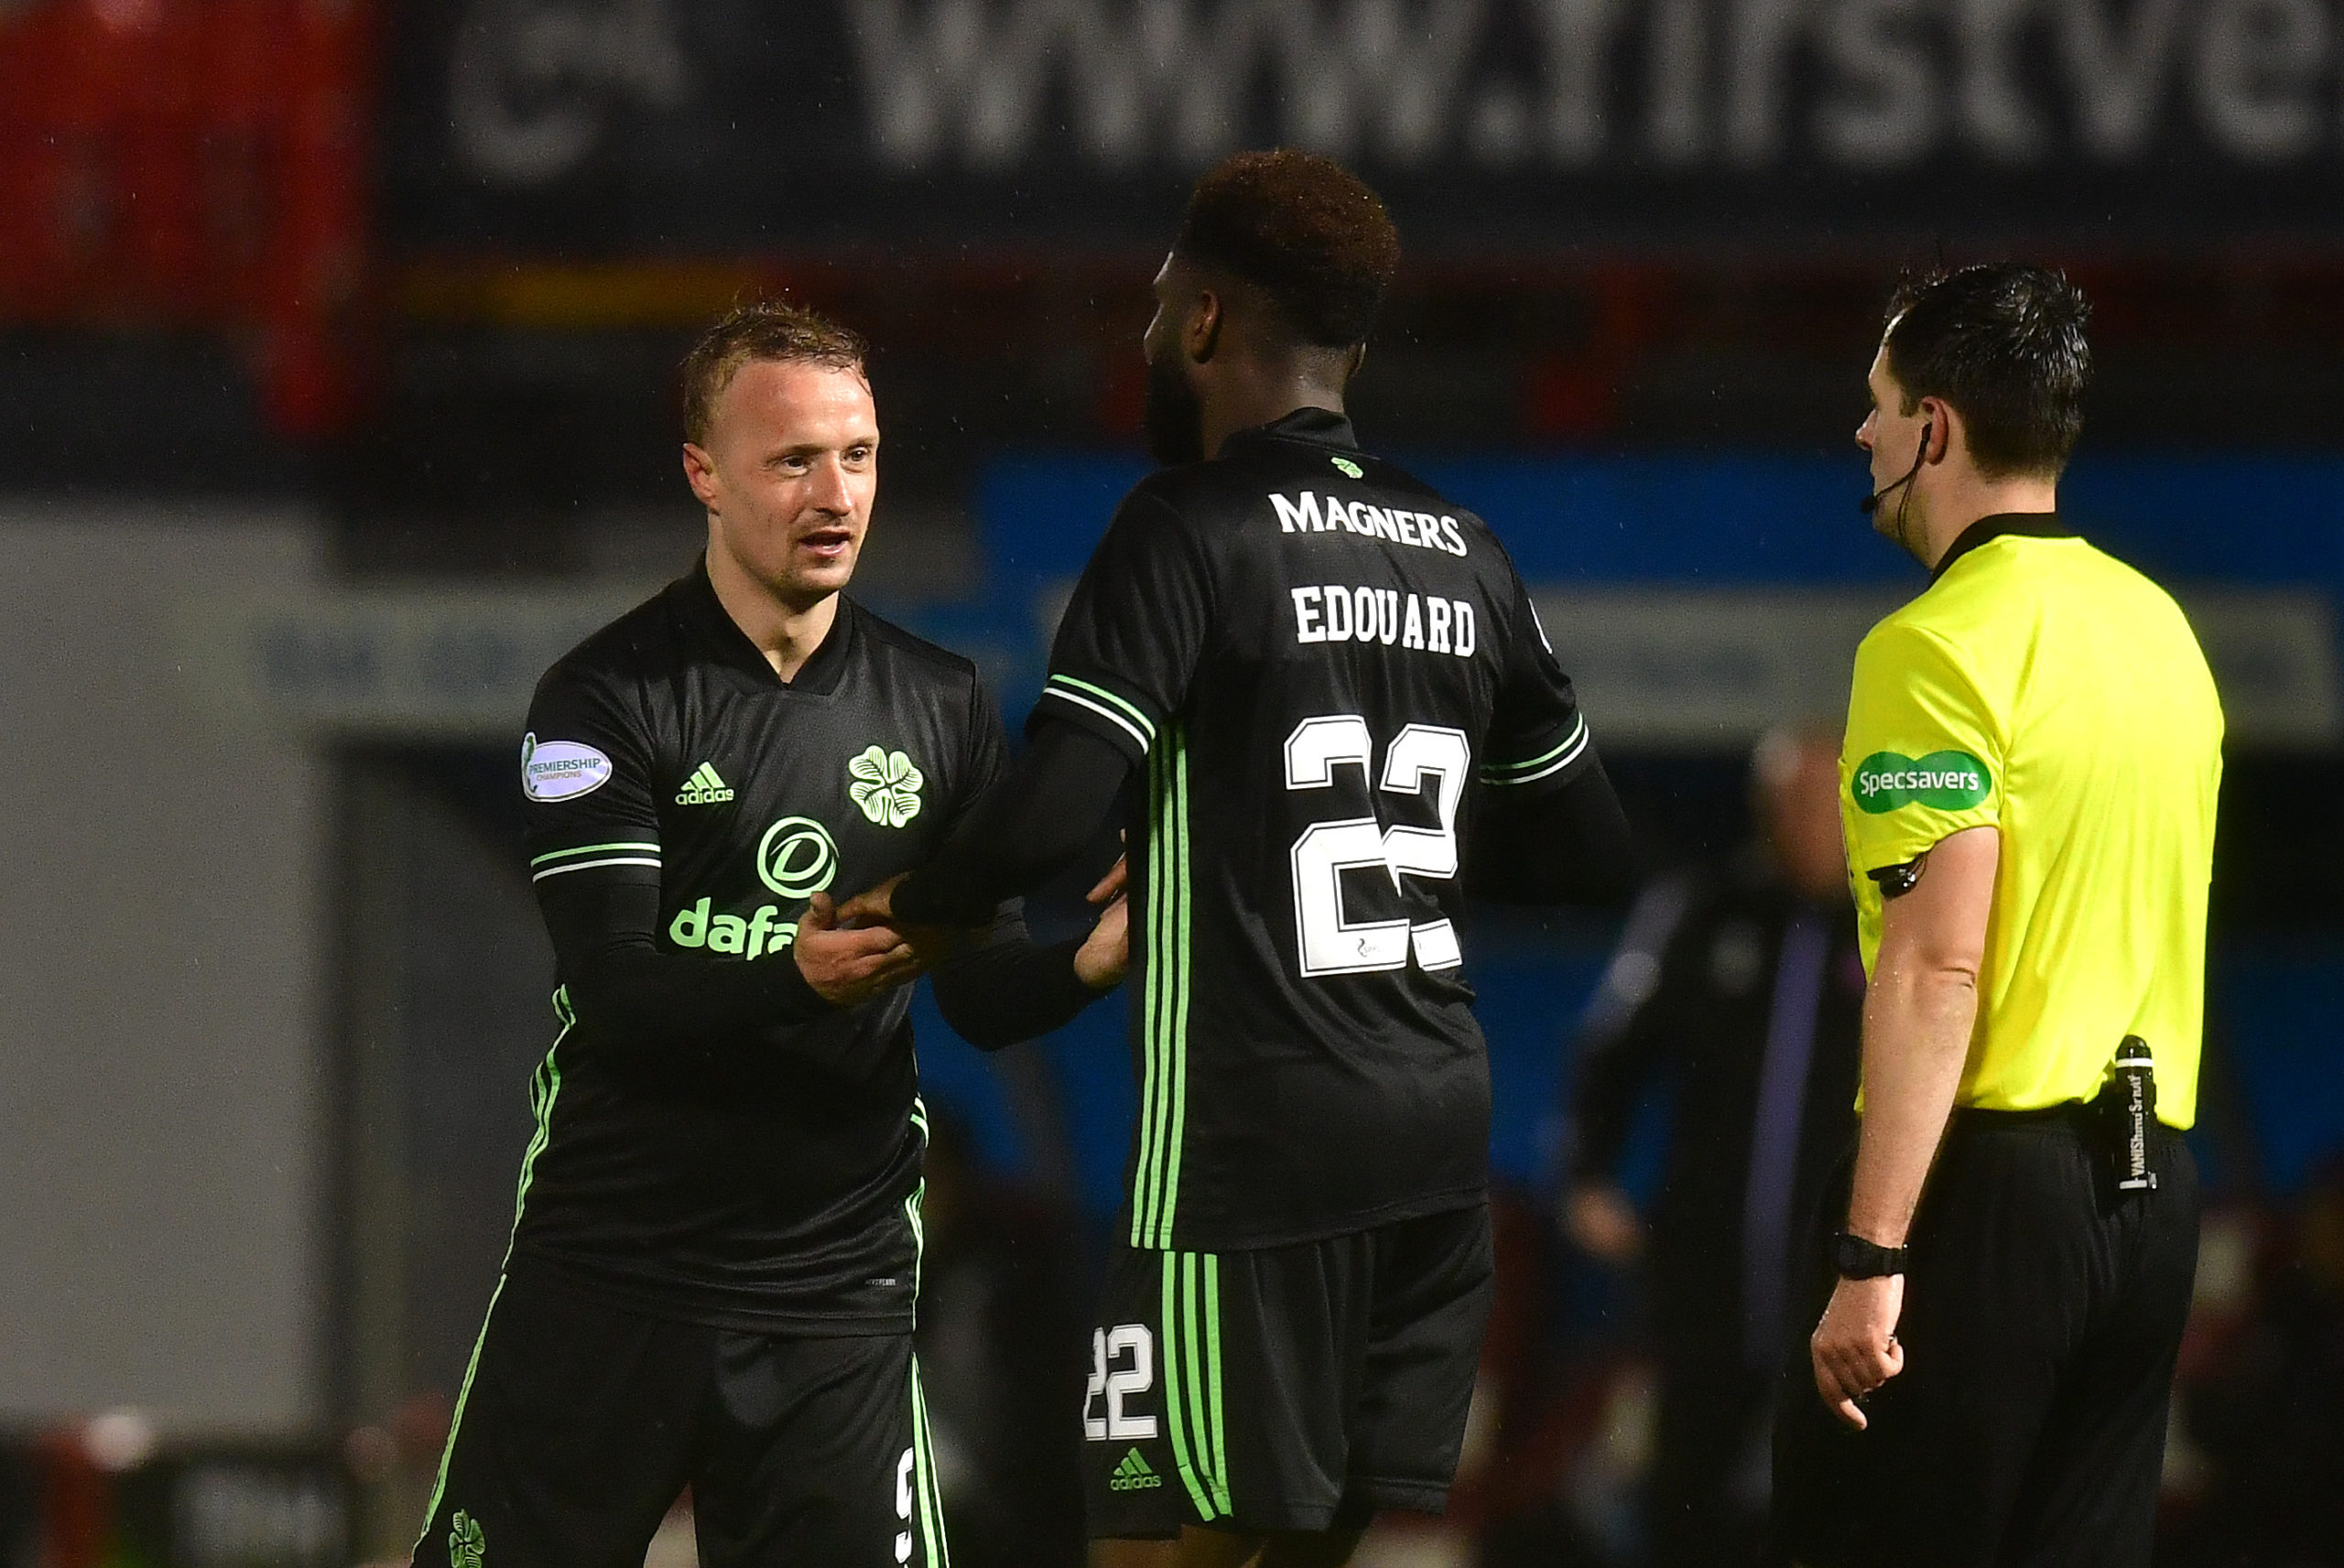 Griffiths claims that Celtic players are focused despite transfer talk